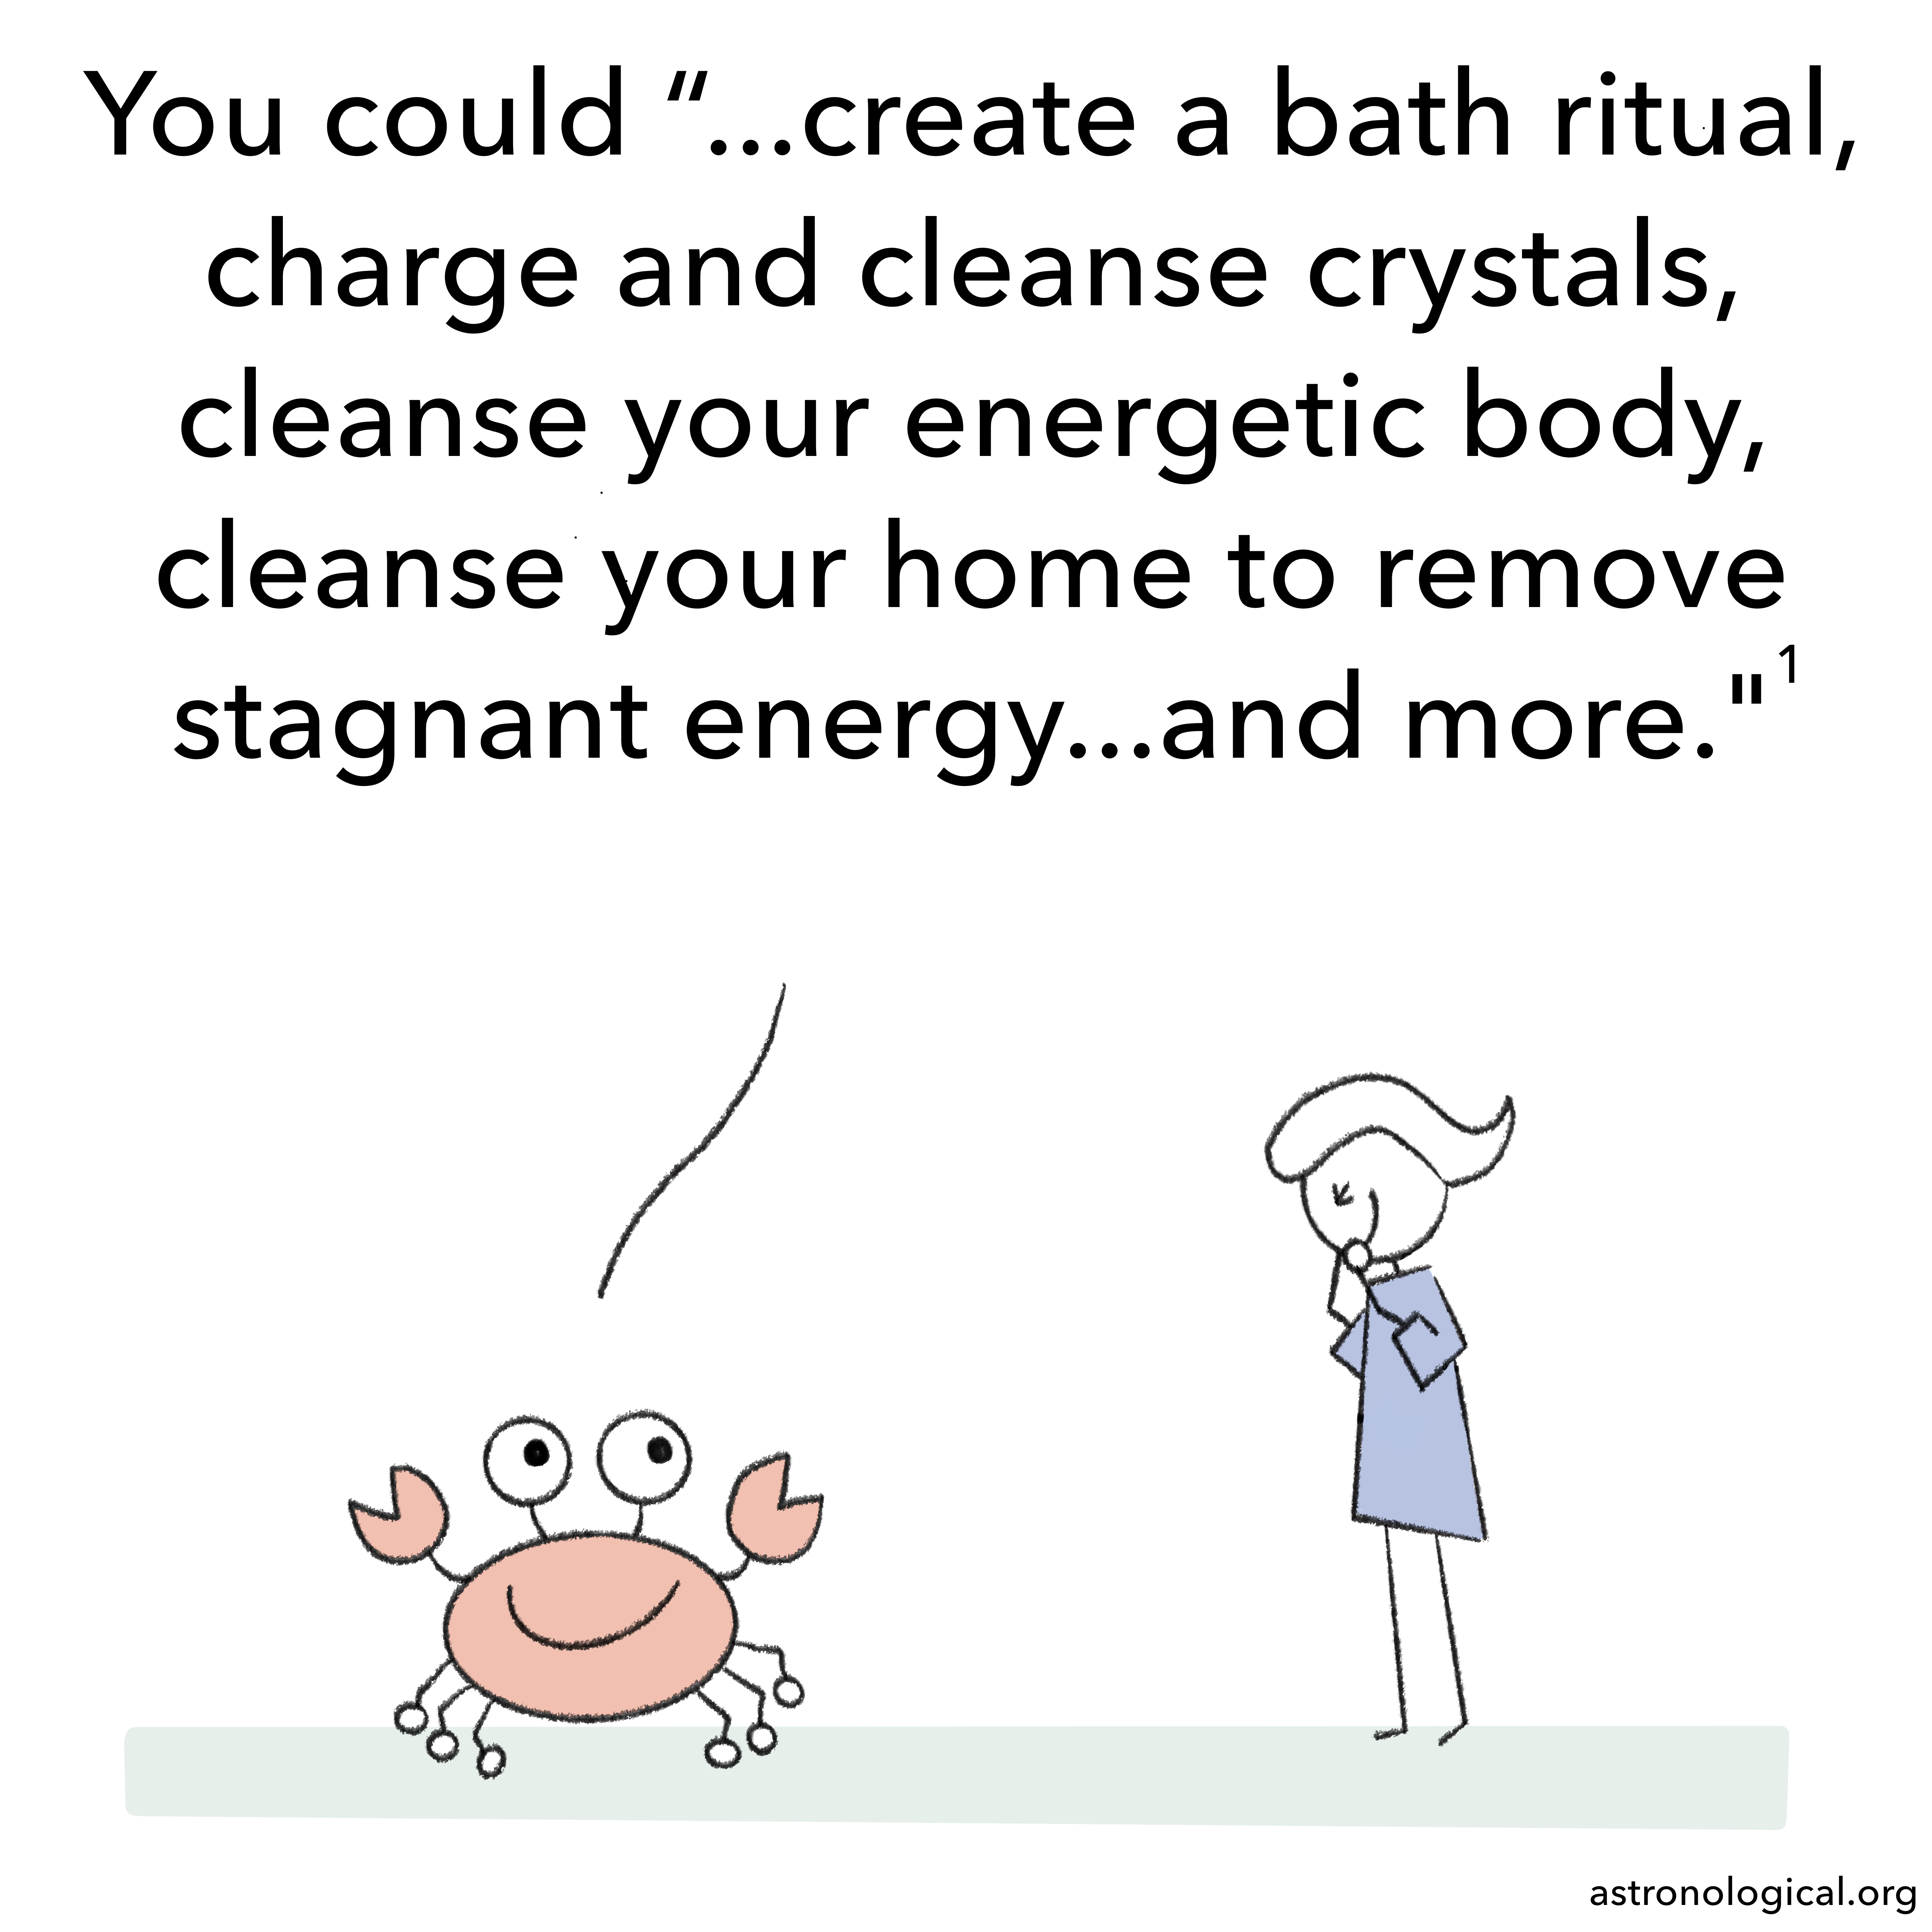 The crab continues: You could create a bath ritual, charge and cleanse crystals, cleanse your energetic body, cleanse your home to remove stagnant energy and more. The girl faces the crab again. She is giggling with both hands over her mouth.